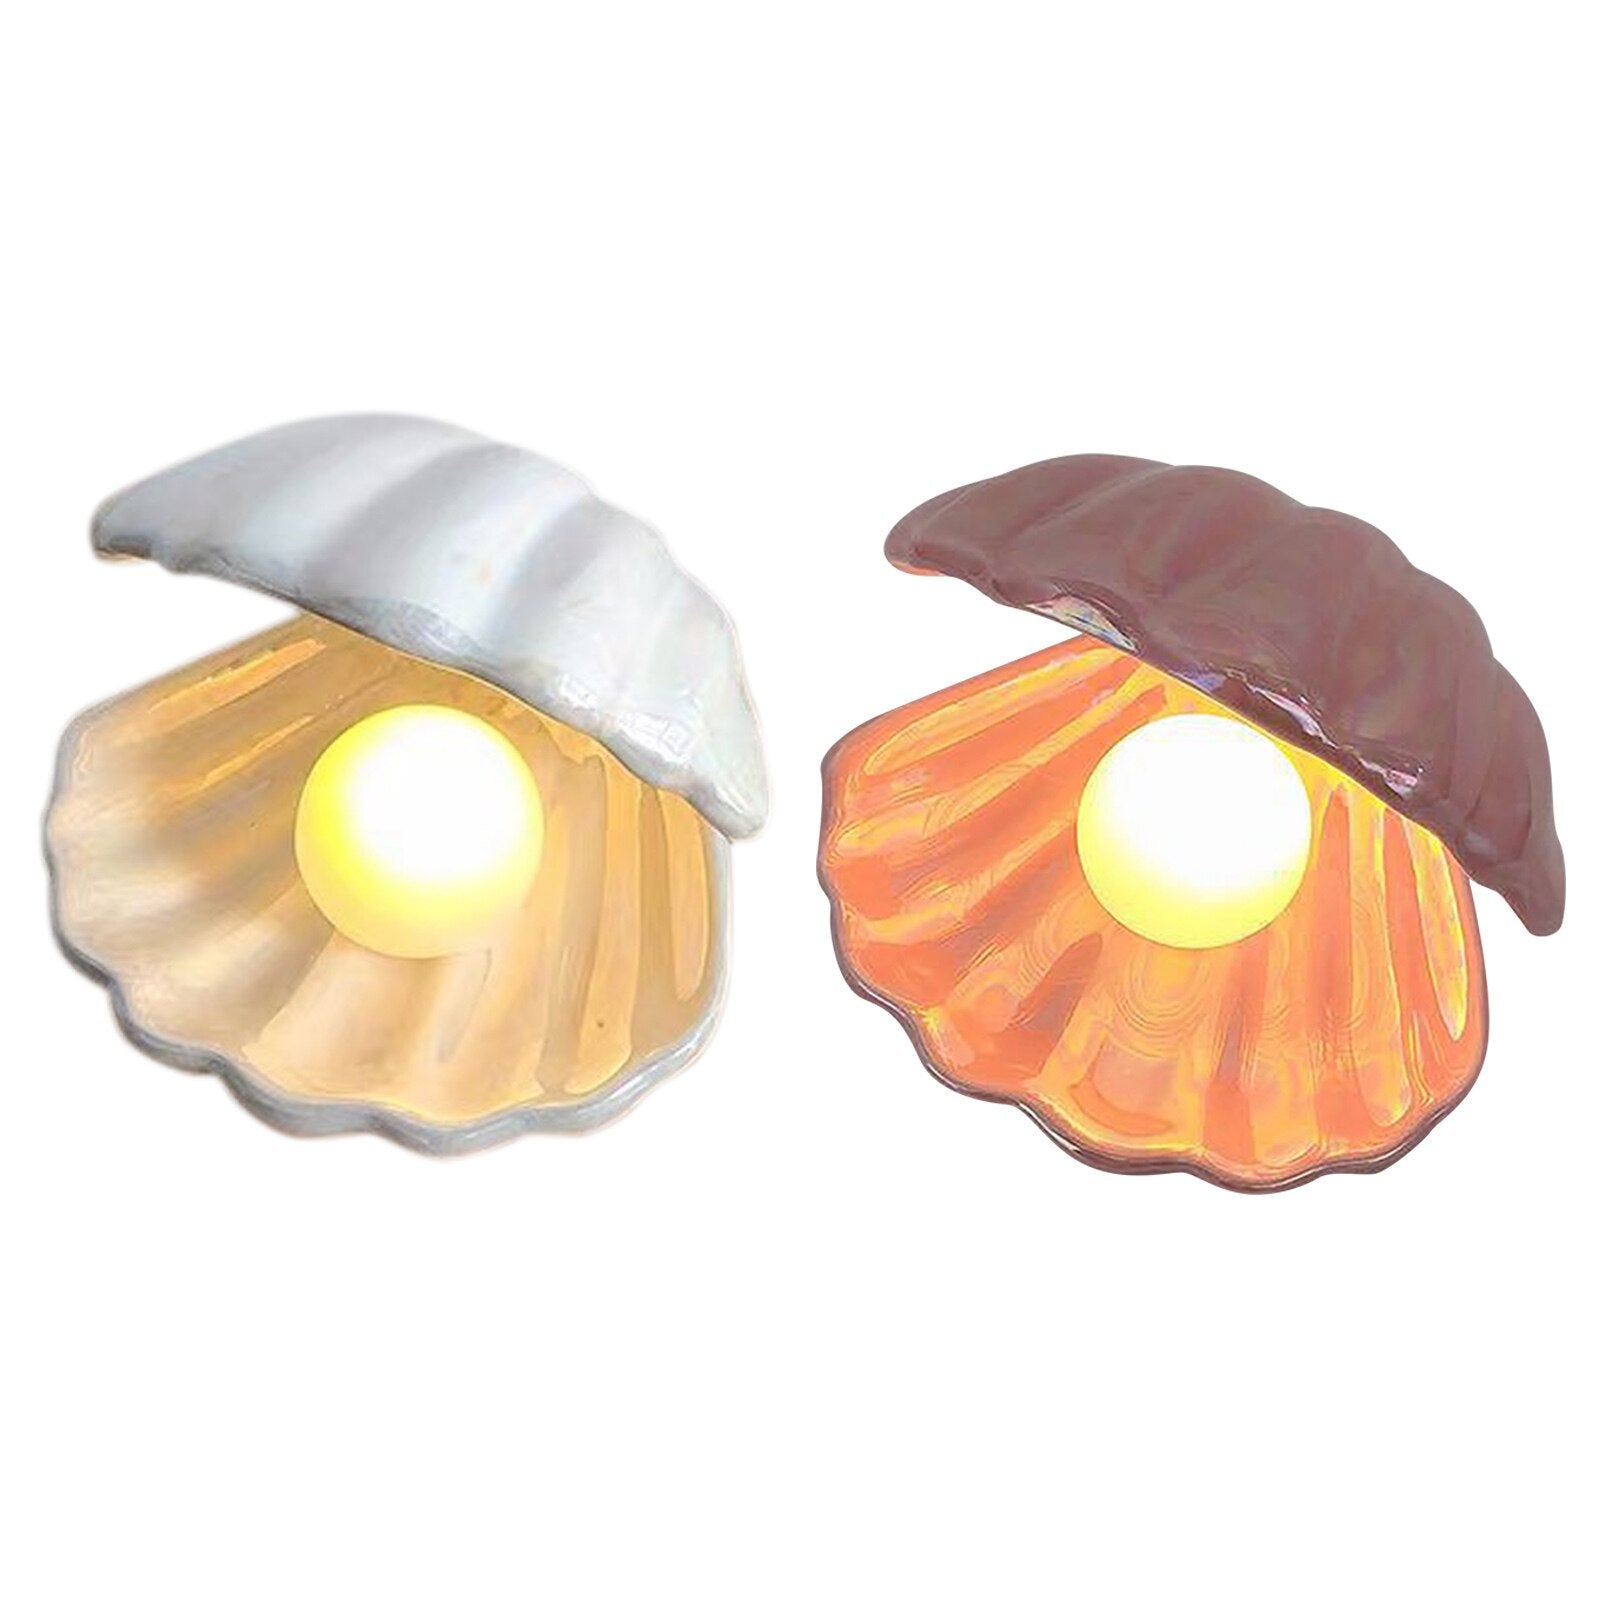 Shell Pearl Light-ceramic Pearl In Shell Night Lamp - Find Epic Store